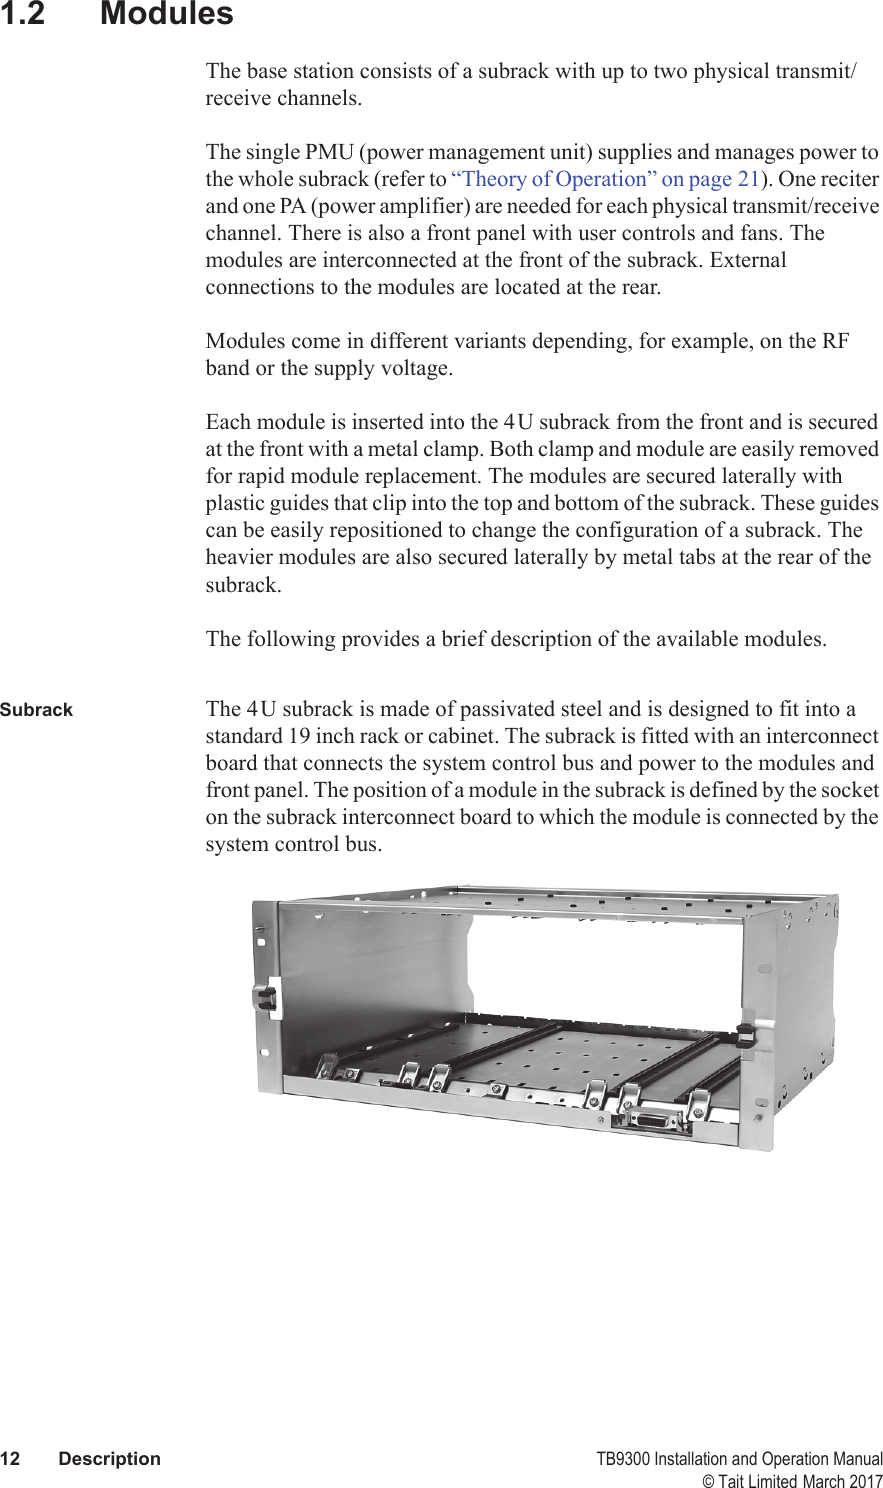  12 Description TB9300 Installation and Operation Manual© Tait Limited March 20171.2 ModulesThe base station consists of a subrack with up to two physical transmit/receive channels.The single PMU (power management unit) supplies and manages power to the whole subrack (refer to “Theory of Operation” on page 21). One reciter and one PA (power amplifier) are needed for each physical transmit/receive channel. There is also a front panel with user controls and fans. The modules are interconnected at the front of the subrack. External connections to the modules are located at the rear.Modules come in different variants depending, for example, on the RF band or the supply voltage. Each module is inserted into the 4U subrack from the front and is secured at the front with a metal clamp. Both clamp and module are easily removed for rapid module replacement. The modules are secured laterally with plastic guides that clip into the top and bottom of the subrack. These guides can be easily repositioned to change the configuration of a subrack. The heavier modules are also secured laterally by metal tabs at the rear of the subrack.The following provides a brief description of the available modules.Subrack The 4U subrack is made of passivated steel and is designed to fit into a standard 19 inch rack or cabinet. The subrack is fitted with an interconnect board that connects the system control bus and power to the modules and front panel. The position of a module in the subrack is defined by the socket on the subrack interconnect board to which the module is connected by the system control bus. 